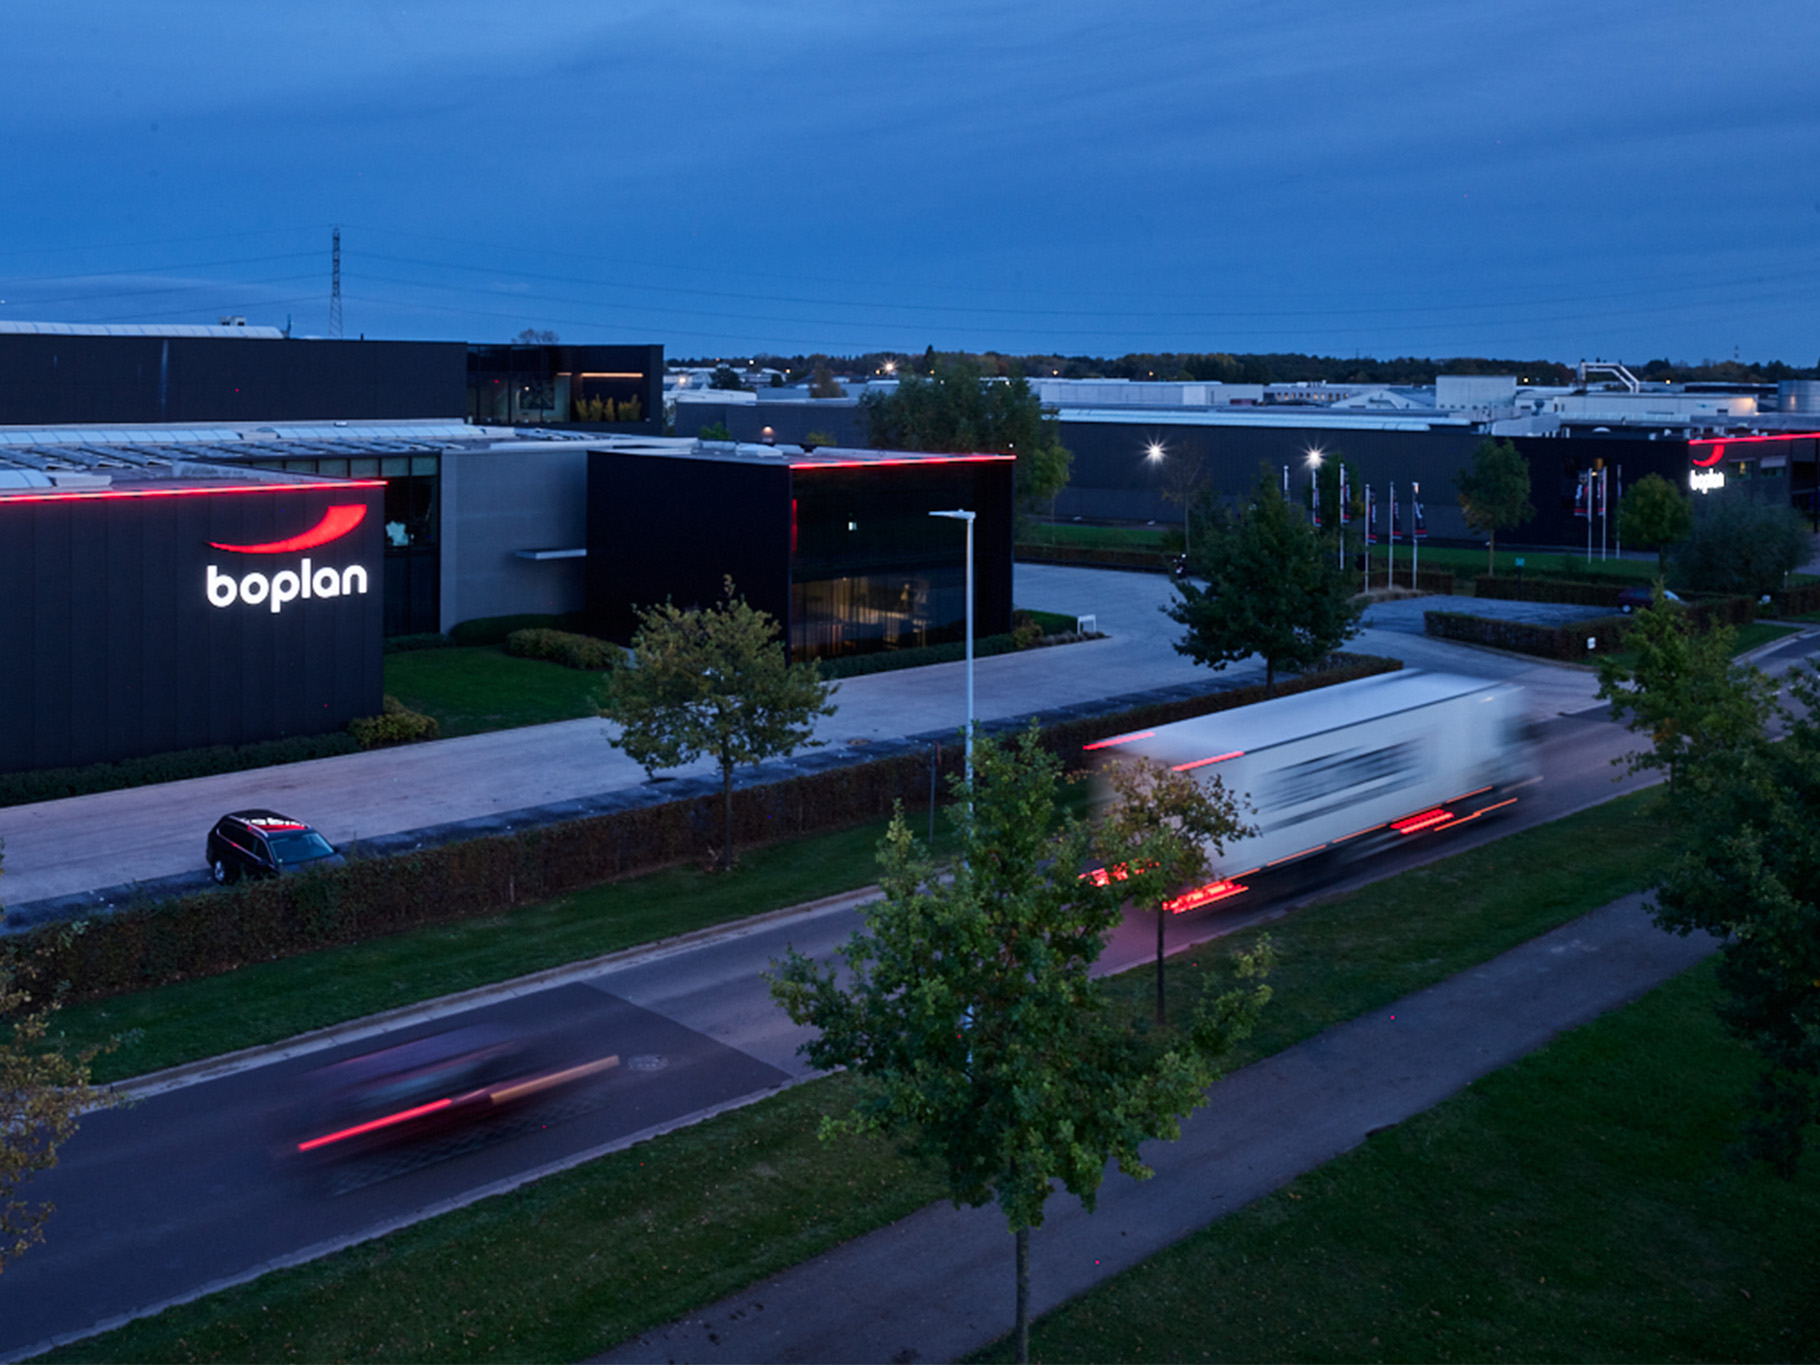 Picture of the Boplan Headquarters in Belgium at nightfall